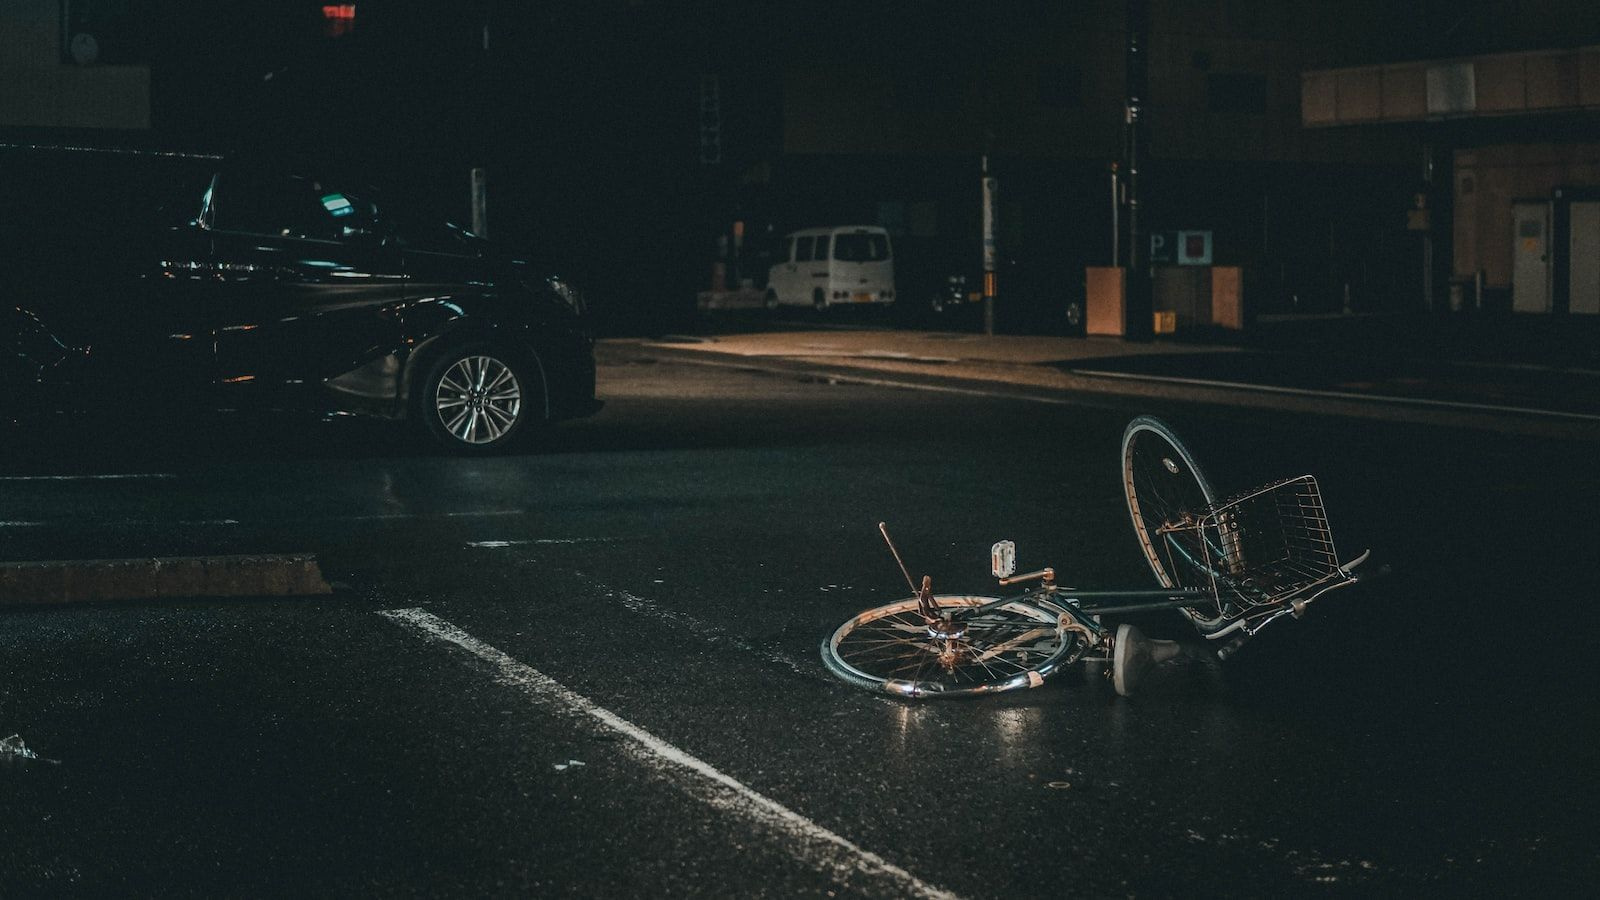 grey bicycle on road near black vehicle at nighttime